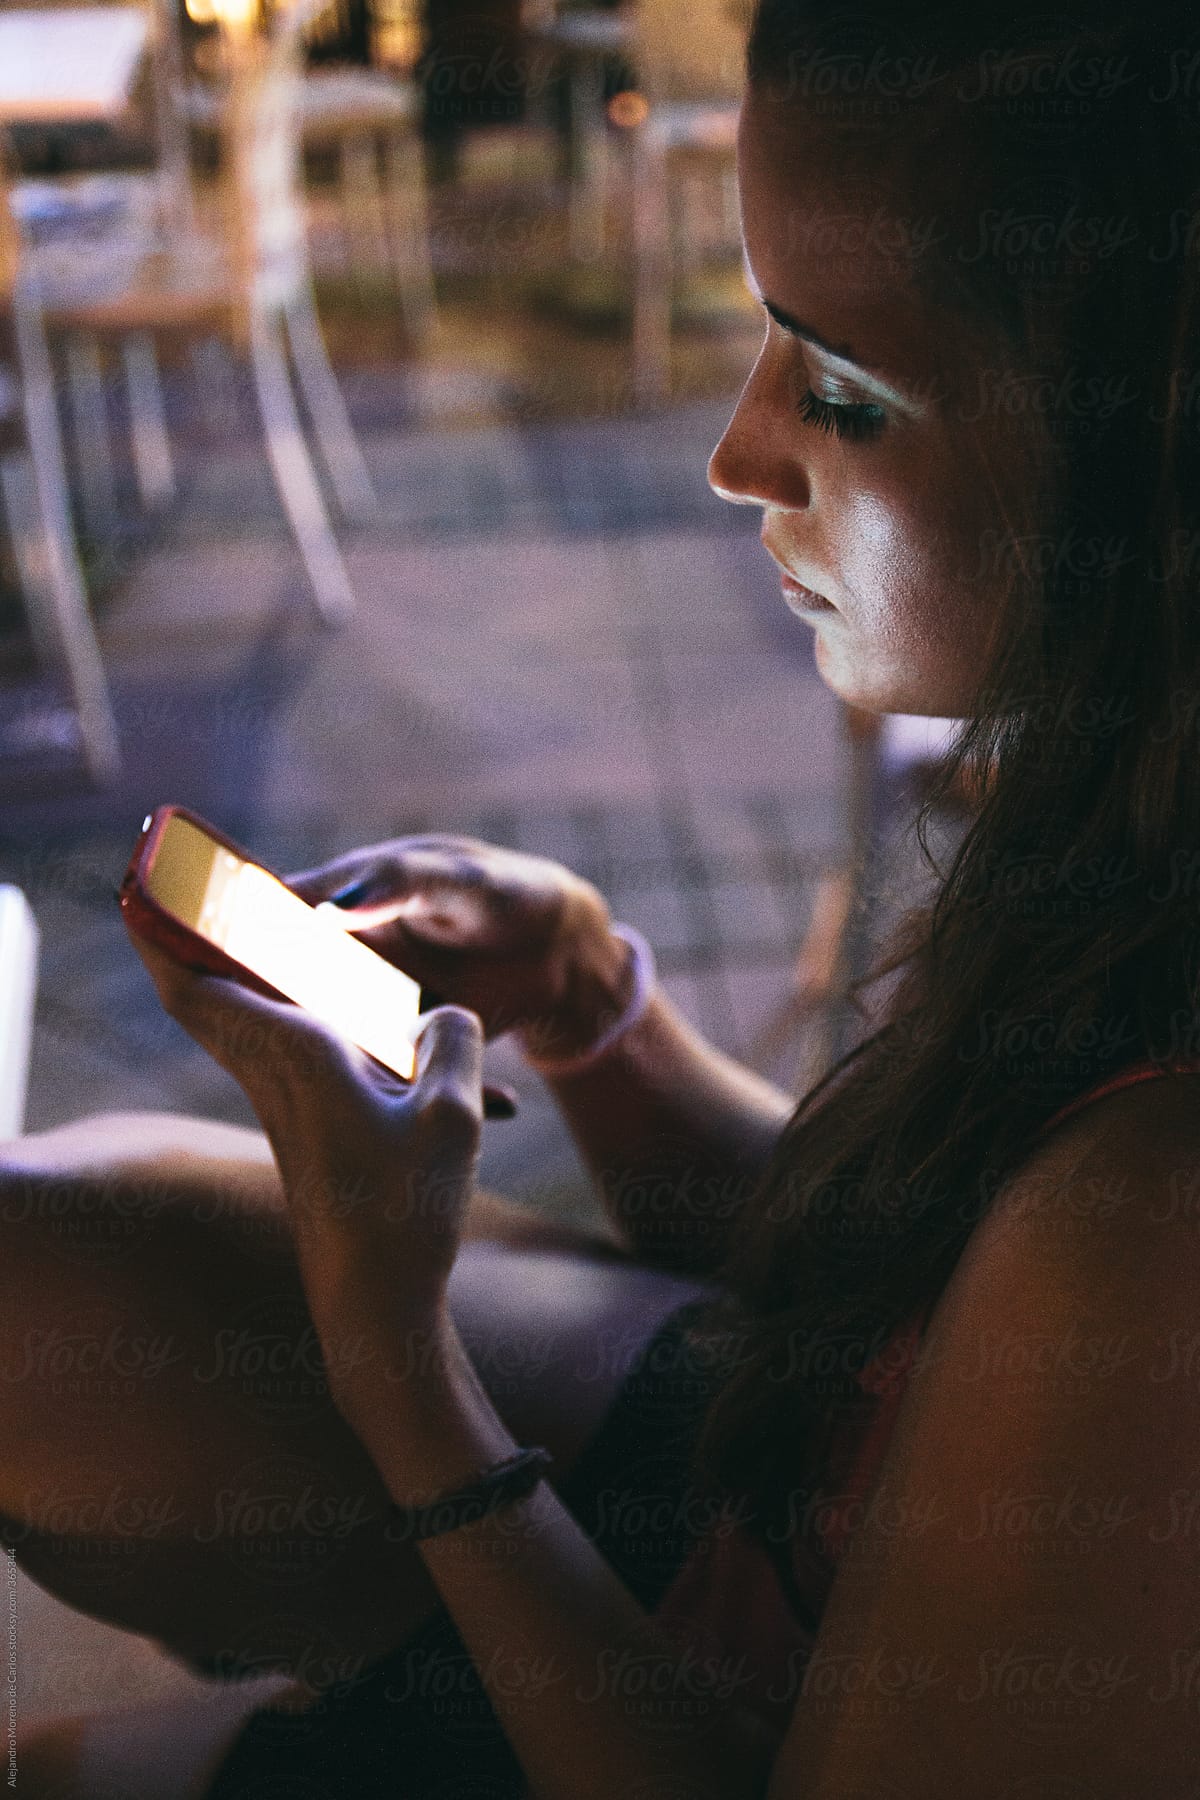 Young beautiful woman texting with her mobile phone at night on a restaurant terrace